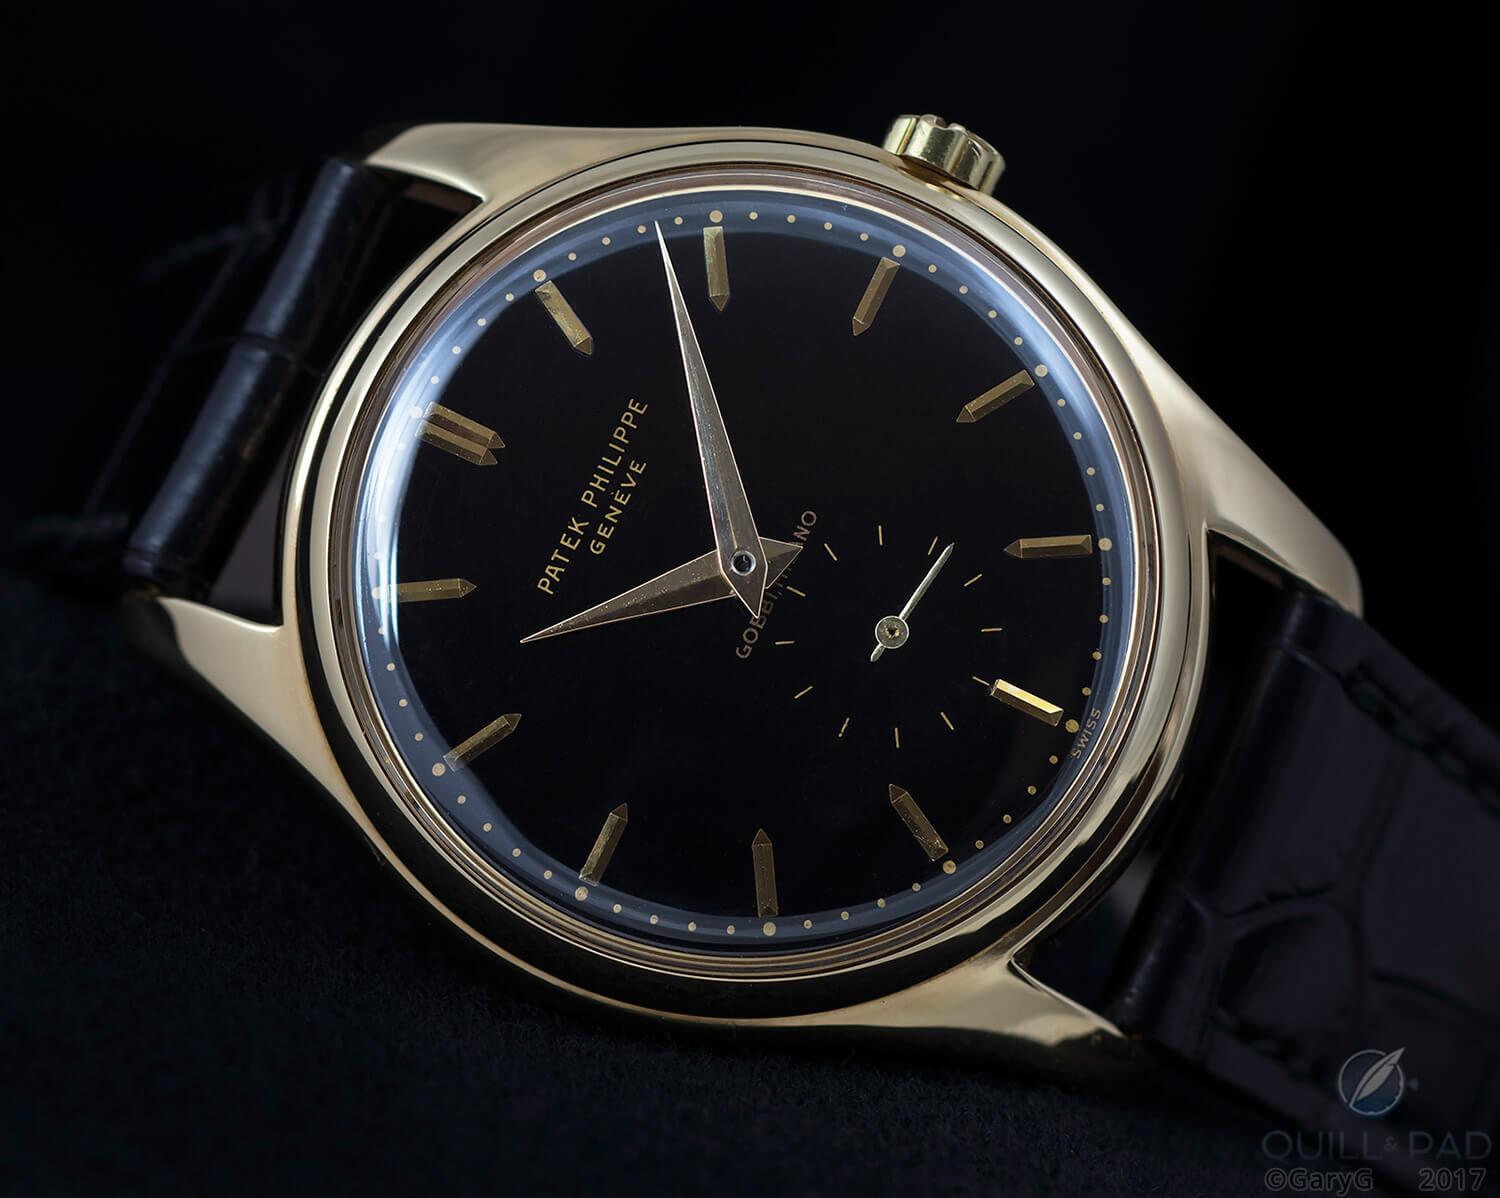 Foundational watch: Patek Philippe Reference 2526